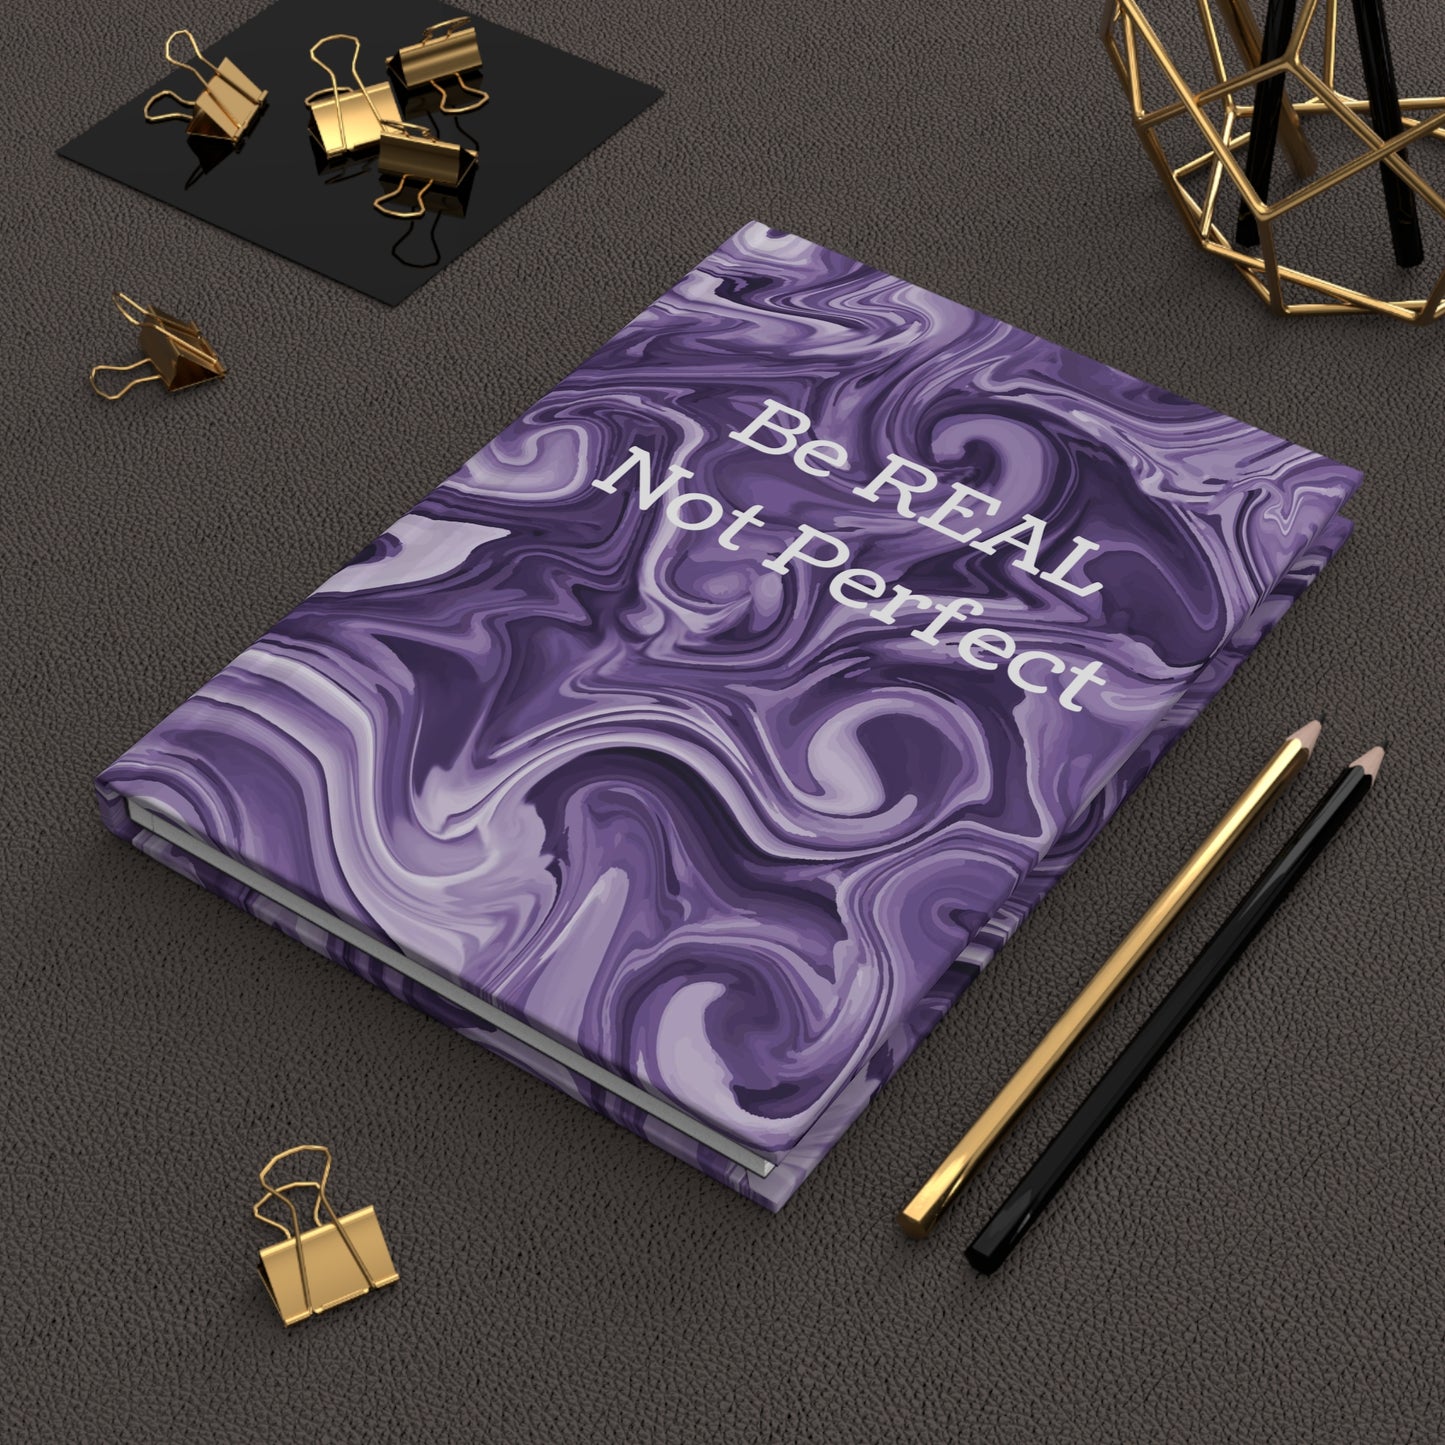 Be REAL Not Perfect - Deep Purple Marble - Hardcover Lined Journal Matte